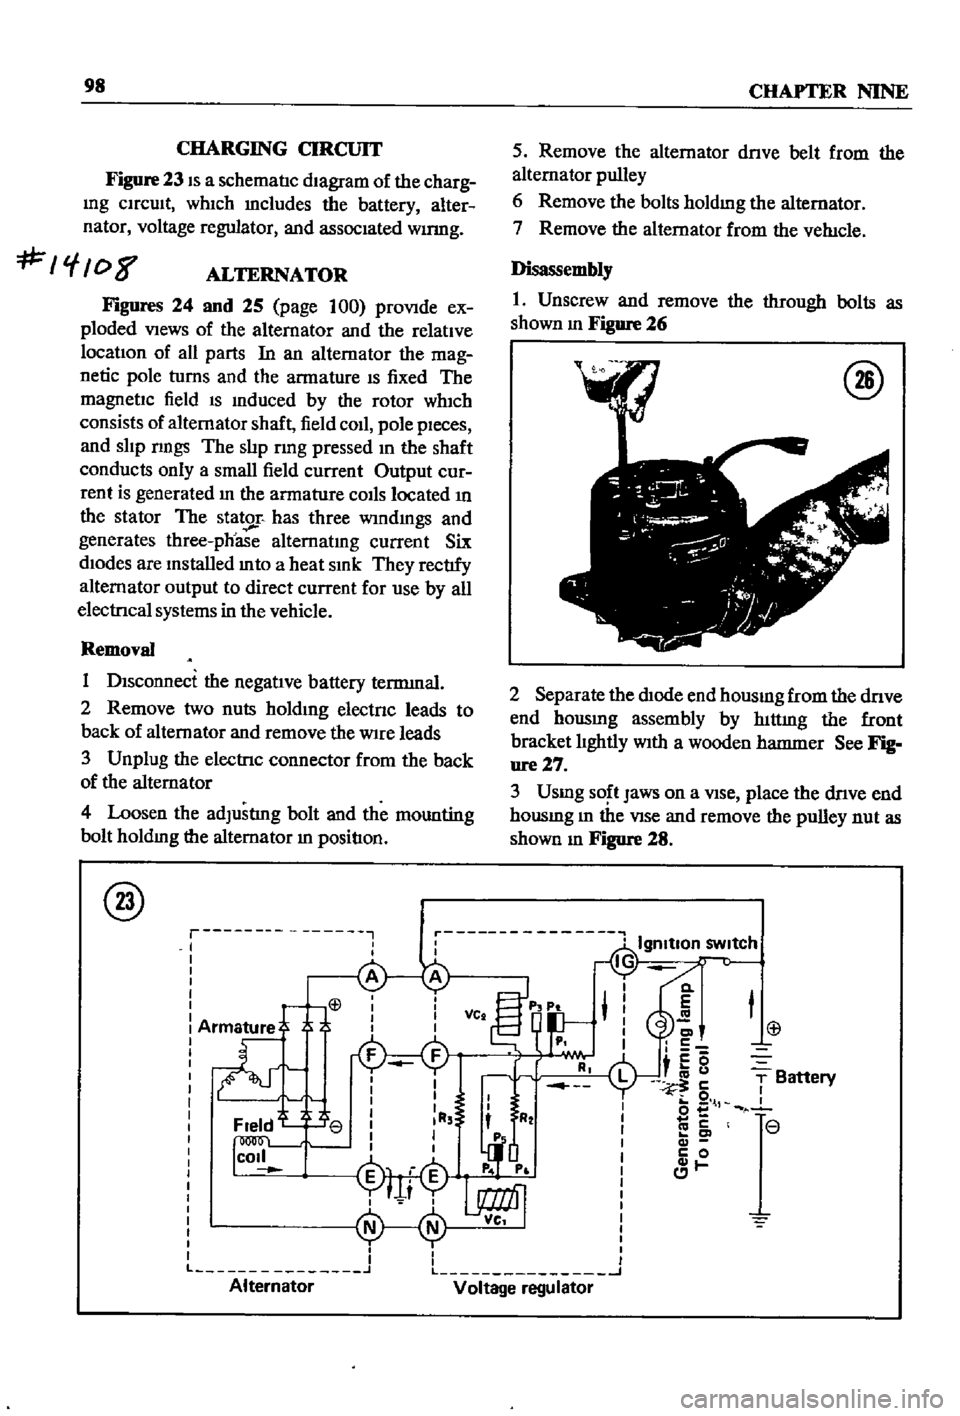 DATSUN 510 1968  Service Repair Manual 
98

CHAPTER 
NINE

CHARGING 
CIRCUIT

Figure 
23 
IS 
a 
schematIc

dIagram 
of 
the

charg

Ing 
CIrcuIt 
whIch

mcludes 
the

battery 
alter

nator

voltage

regulator 
and 
assocIated

wumg

f

08